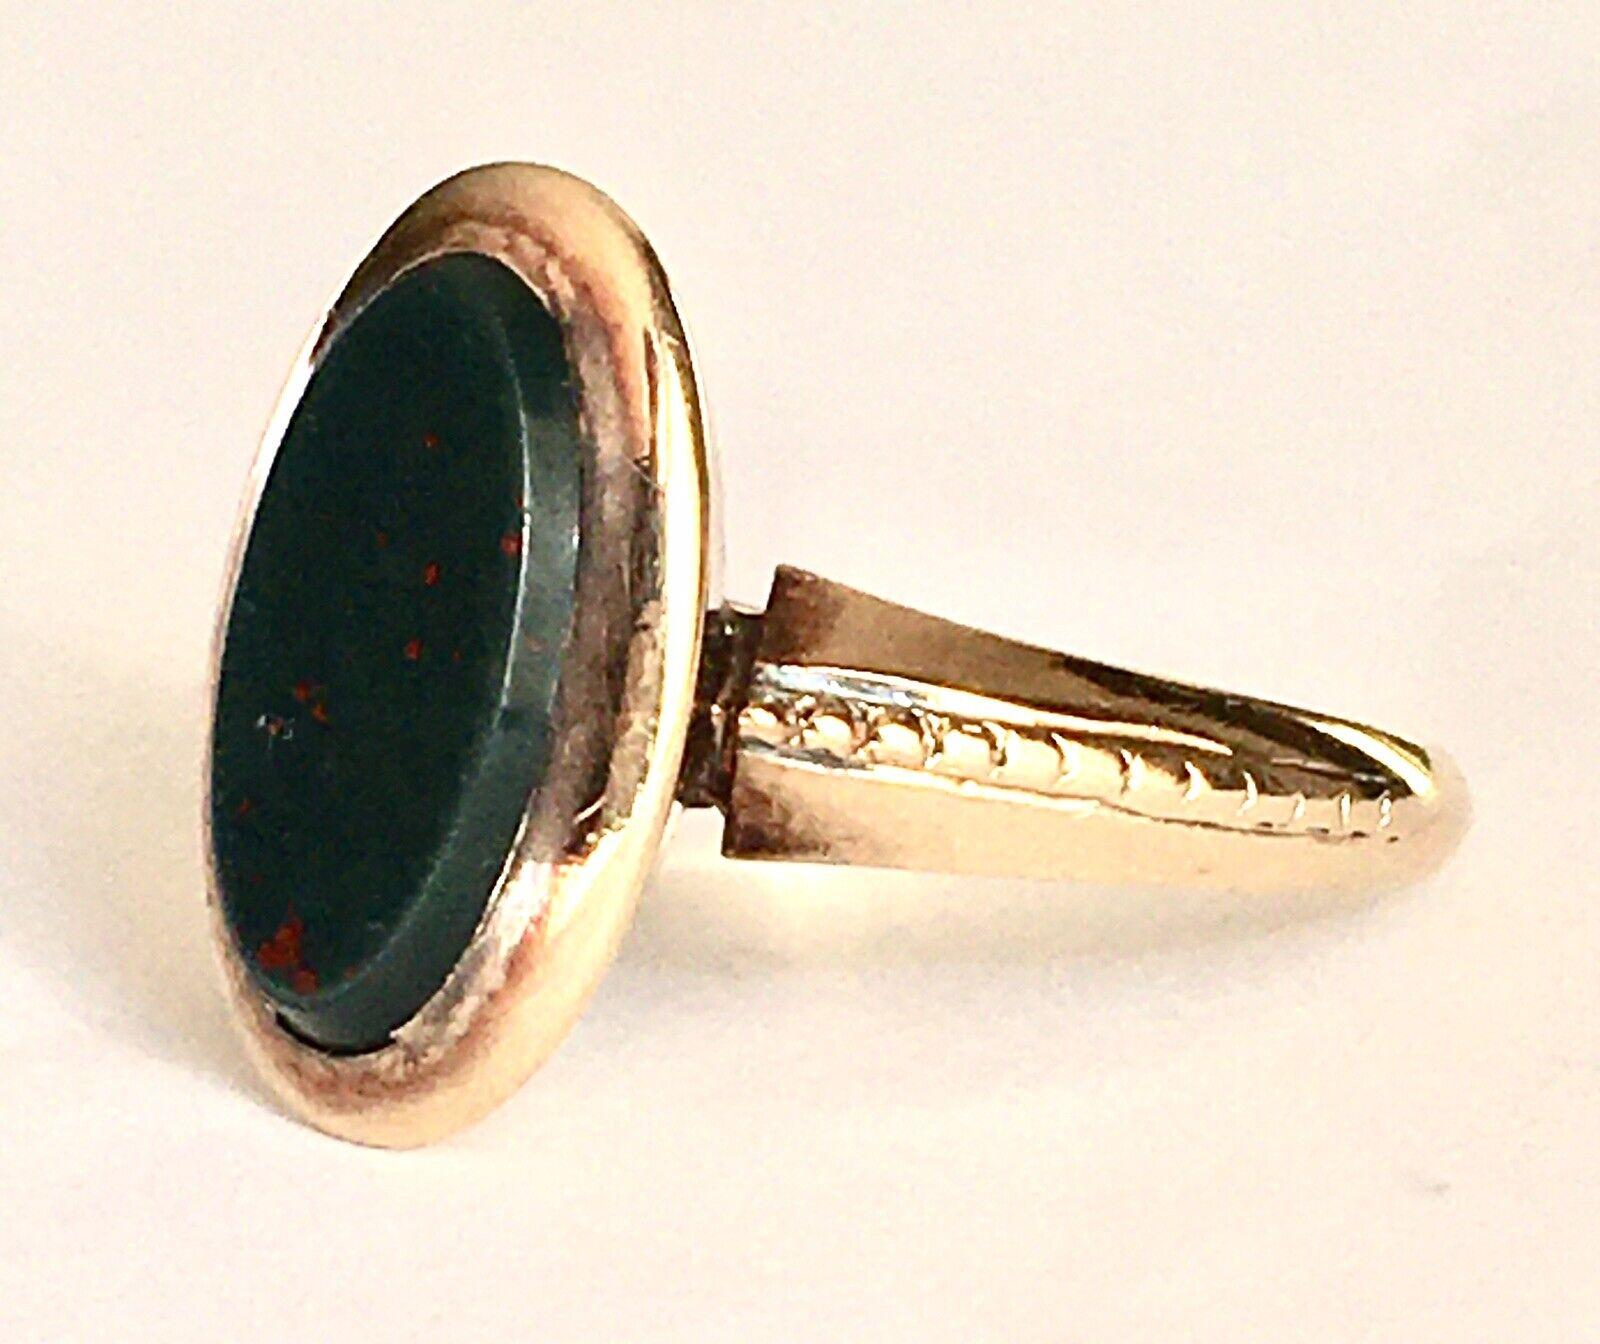 14K GOLD ANTIQUE VICTORIAN BLOODSTONE RING 

Over 100 years old in excellent condition considering its age  

Finger Size 5.5 
14 karat yellow gold Victorian era Bloodstone lady's ring, 6 mm by 11.5 mm flat top bloodstone, finger size 5.5, weighting